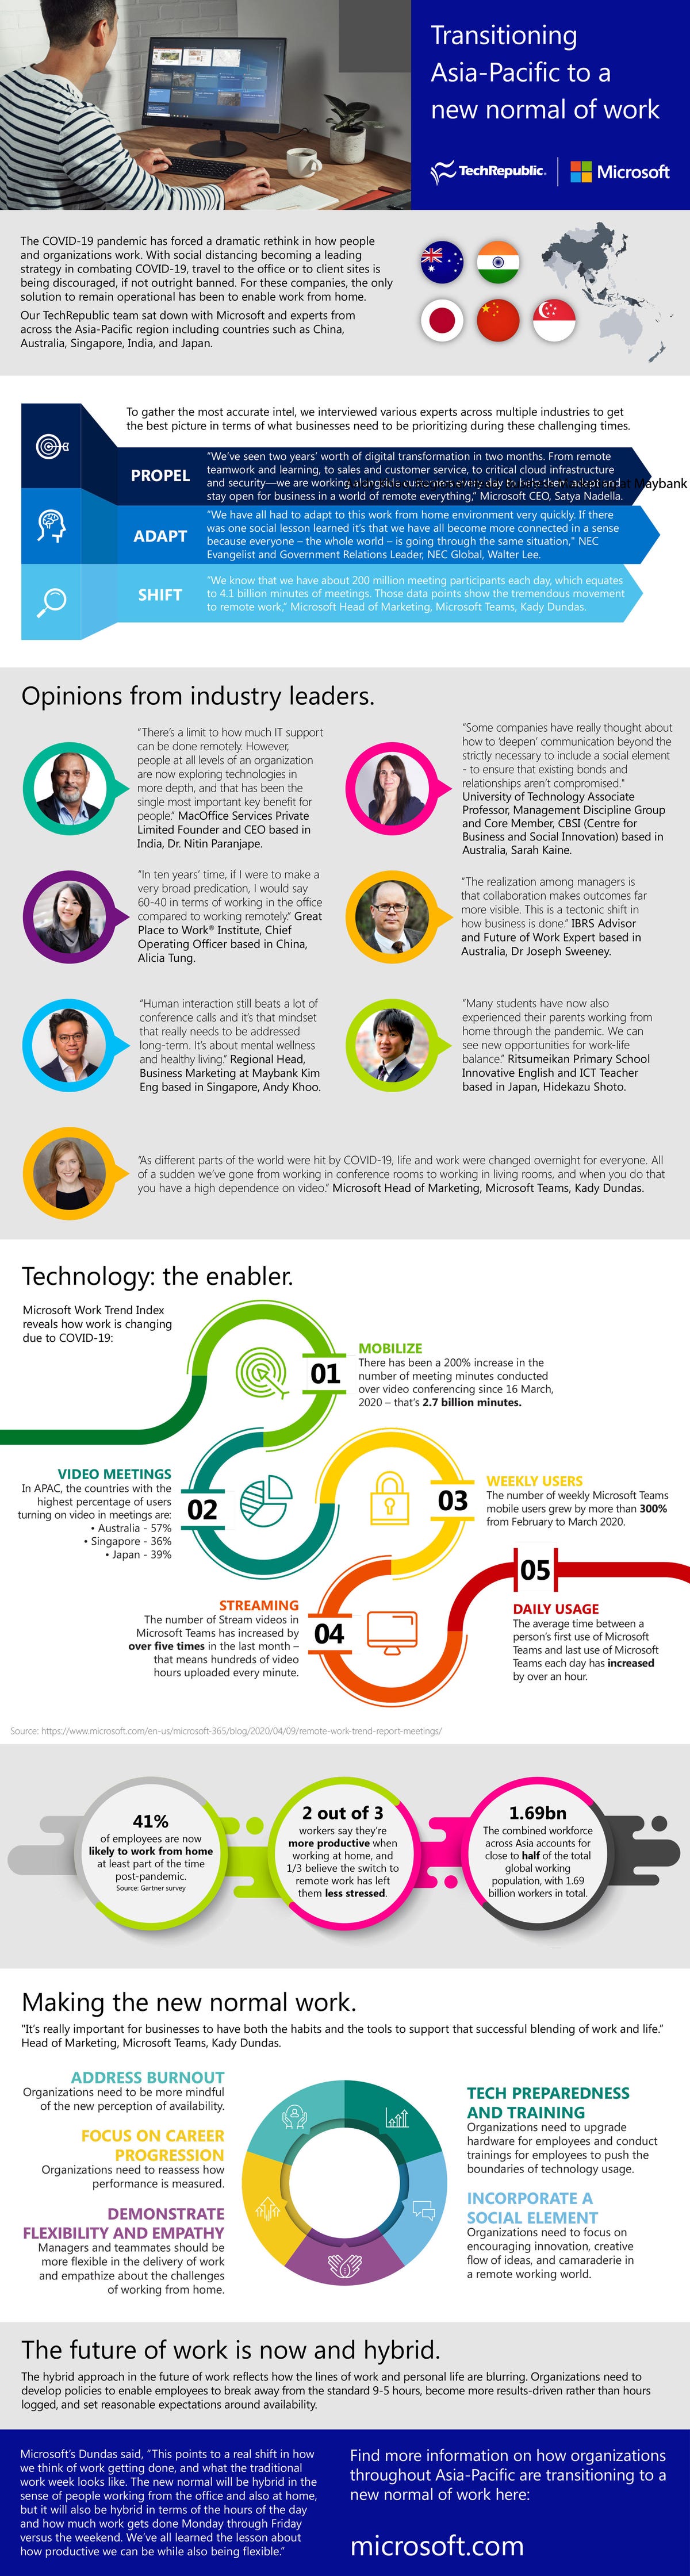 61595-msft-infographic-fa-aw-hq.jpg